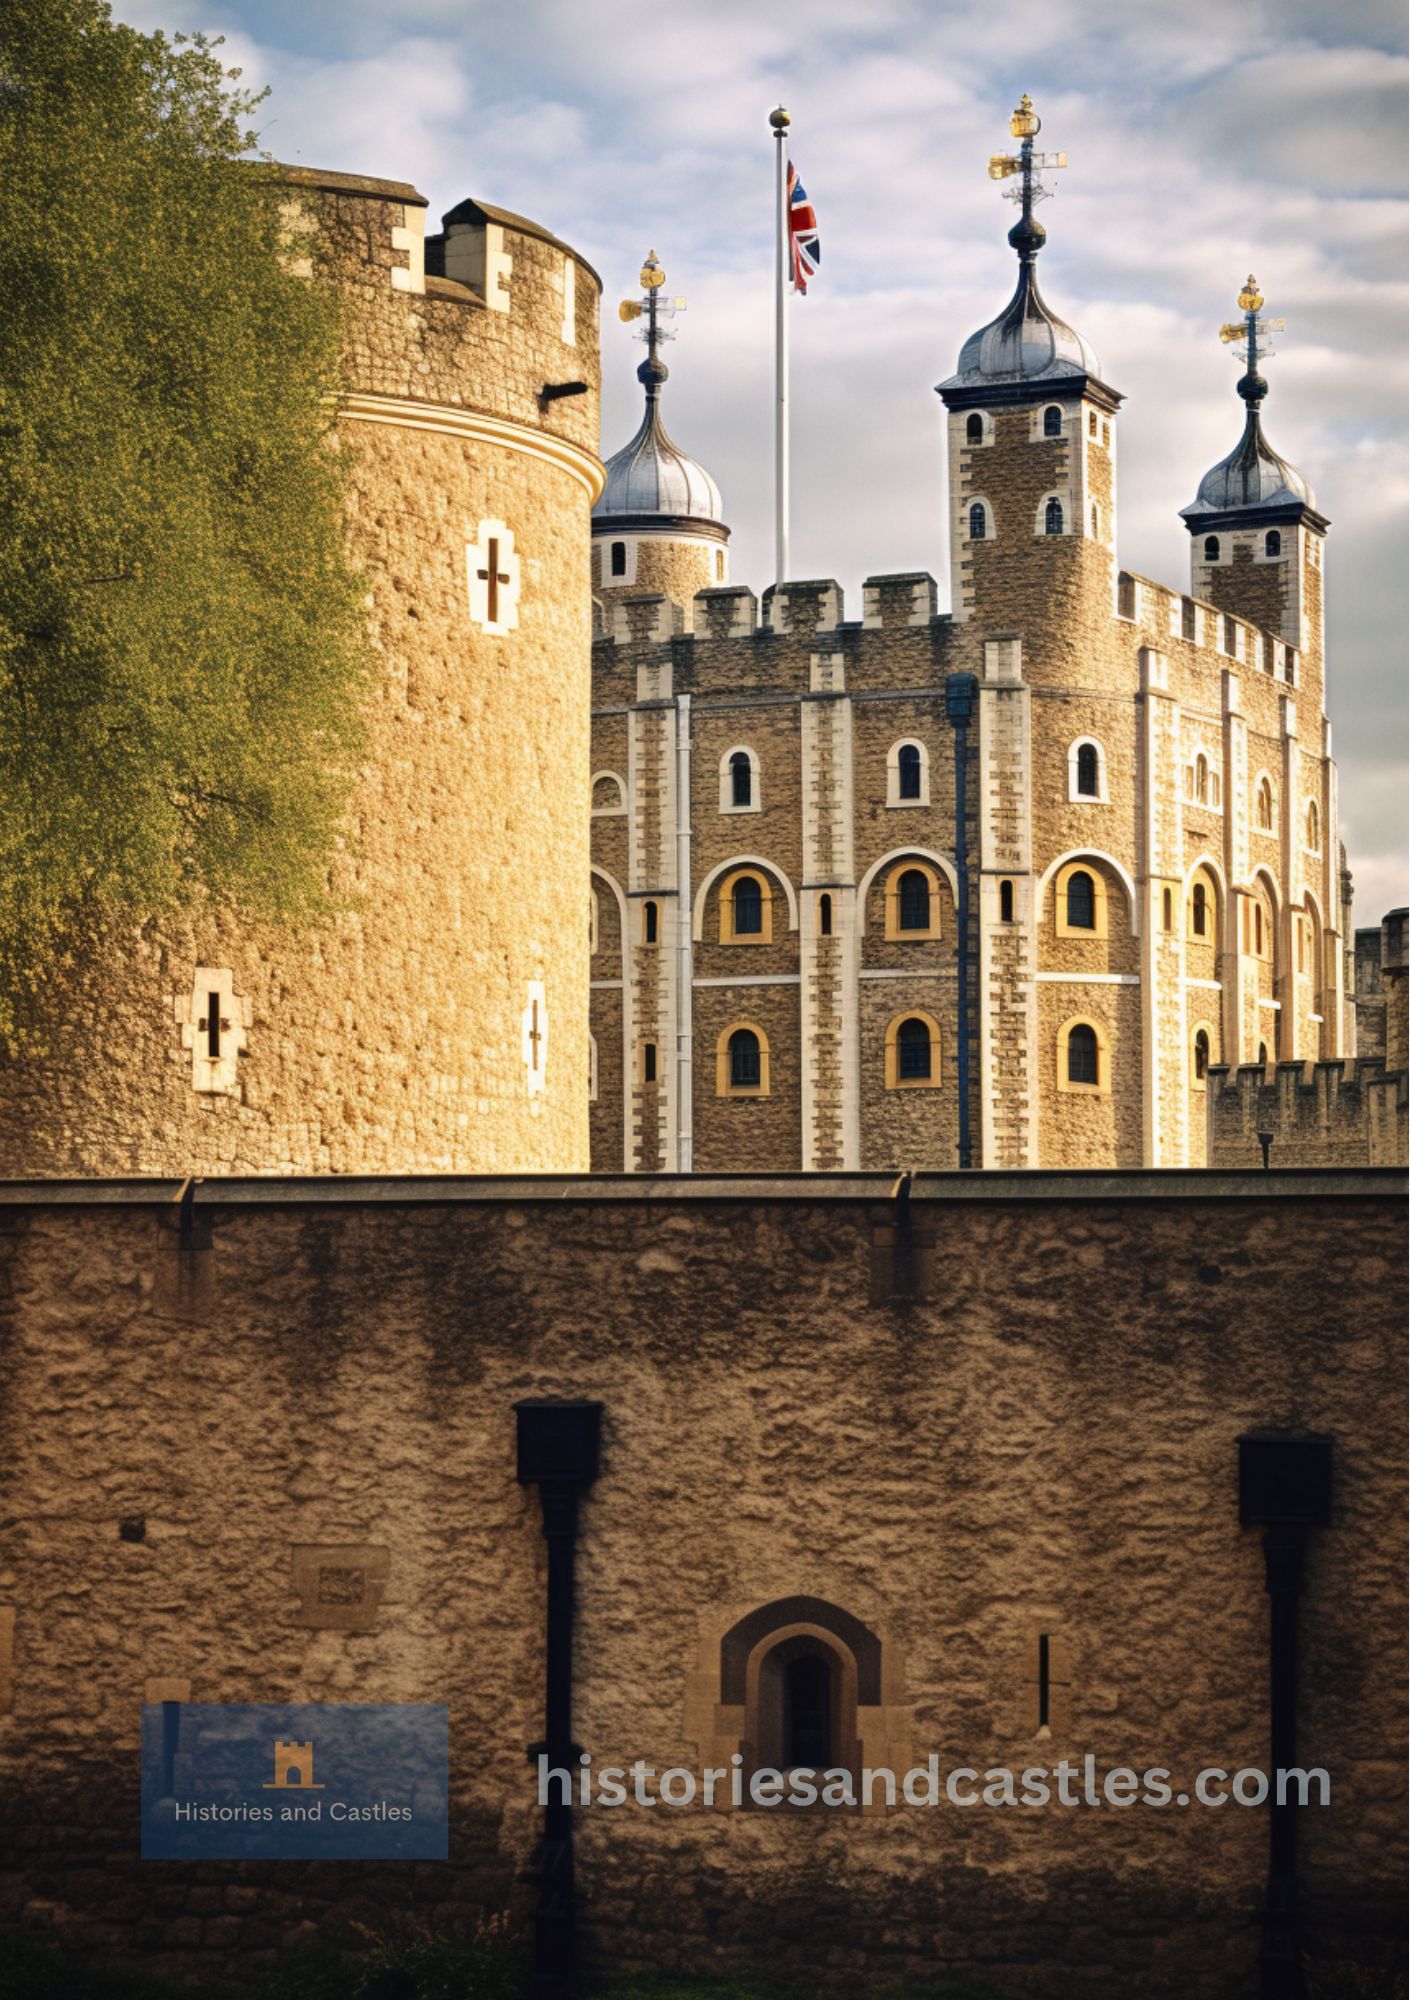 Tower of London in England